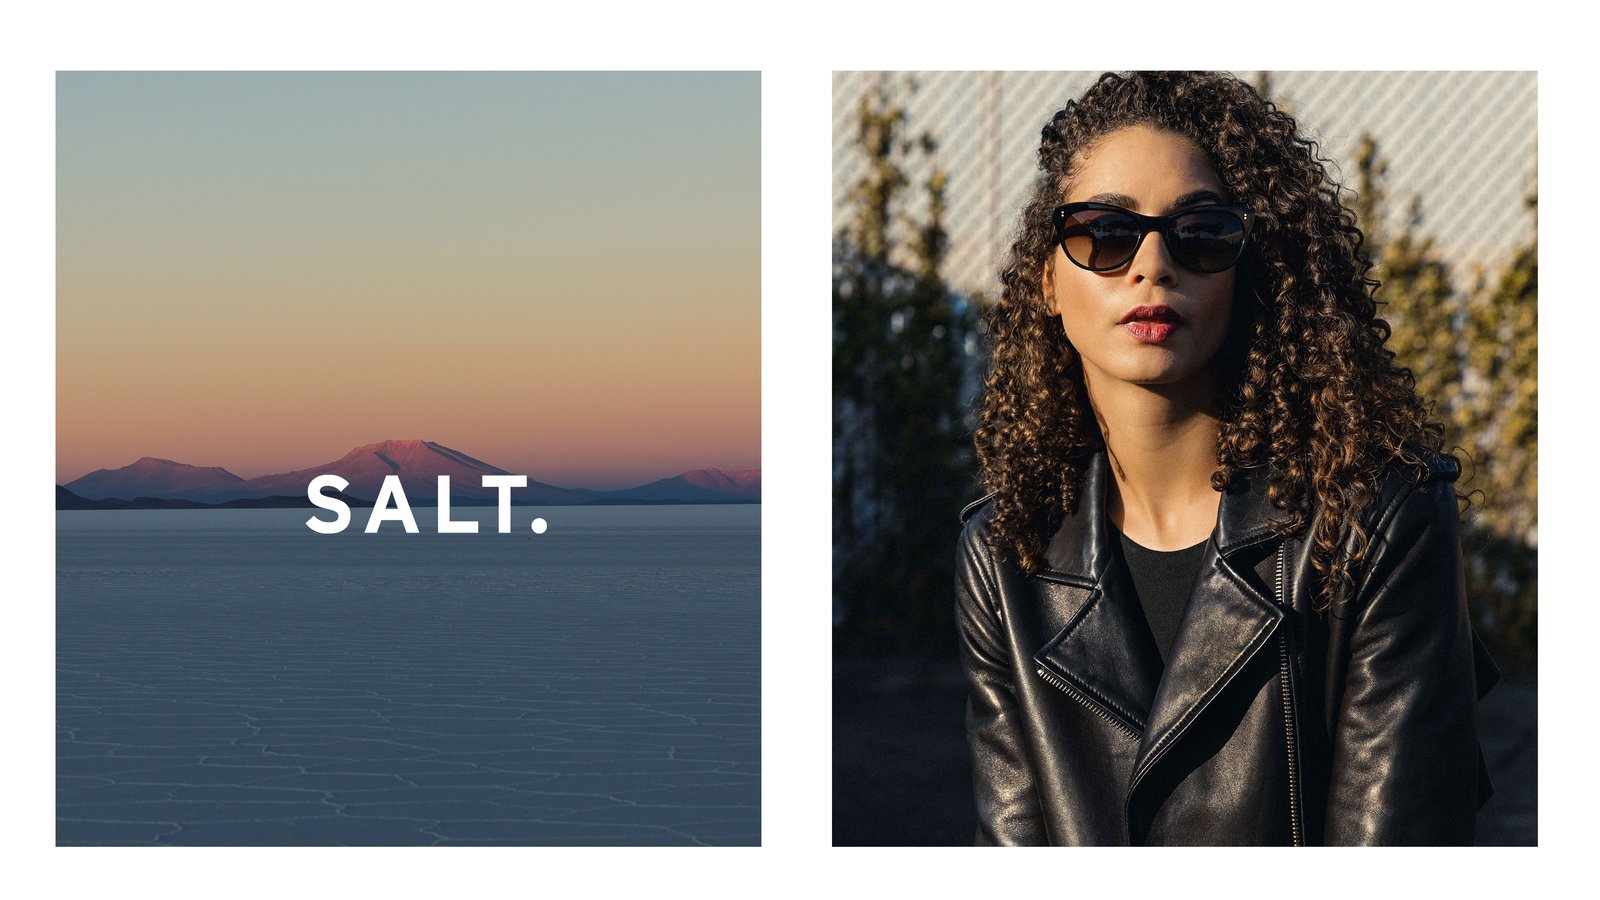 Eyeglasses by SALT from article The Best Independent Eyewear Brands published by FAVR the premium eyewear finder.